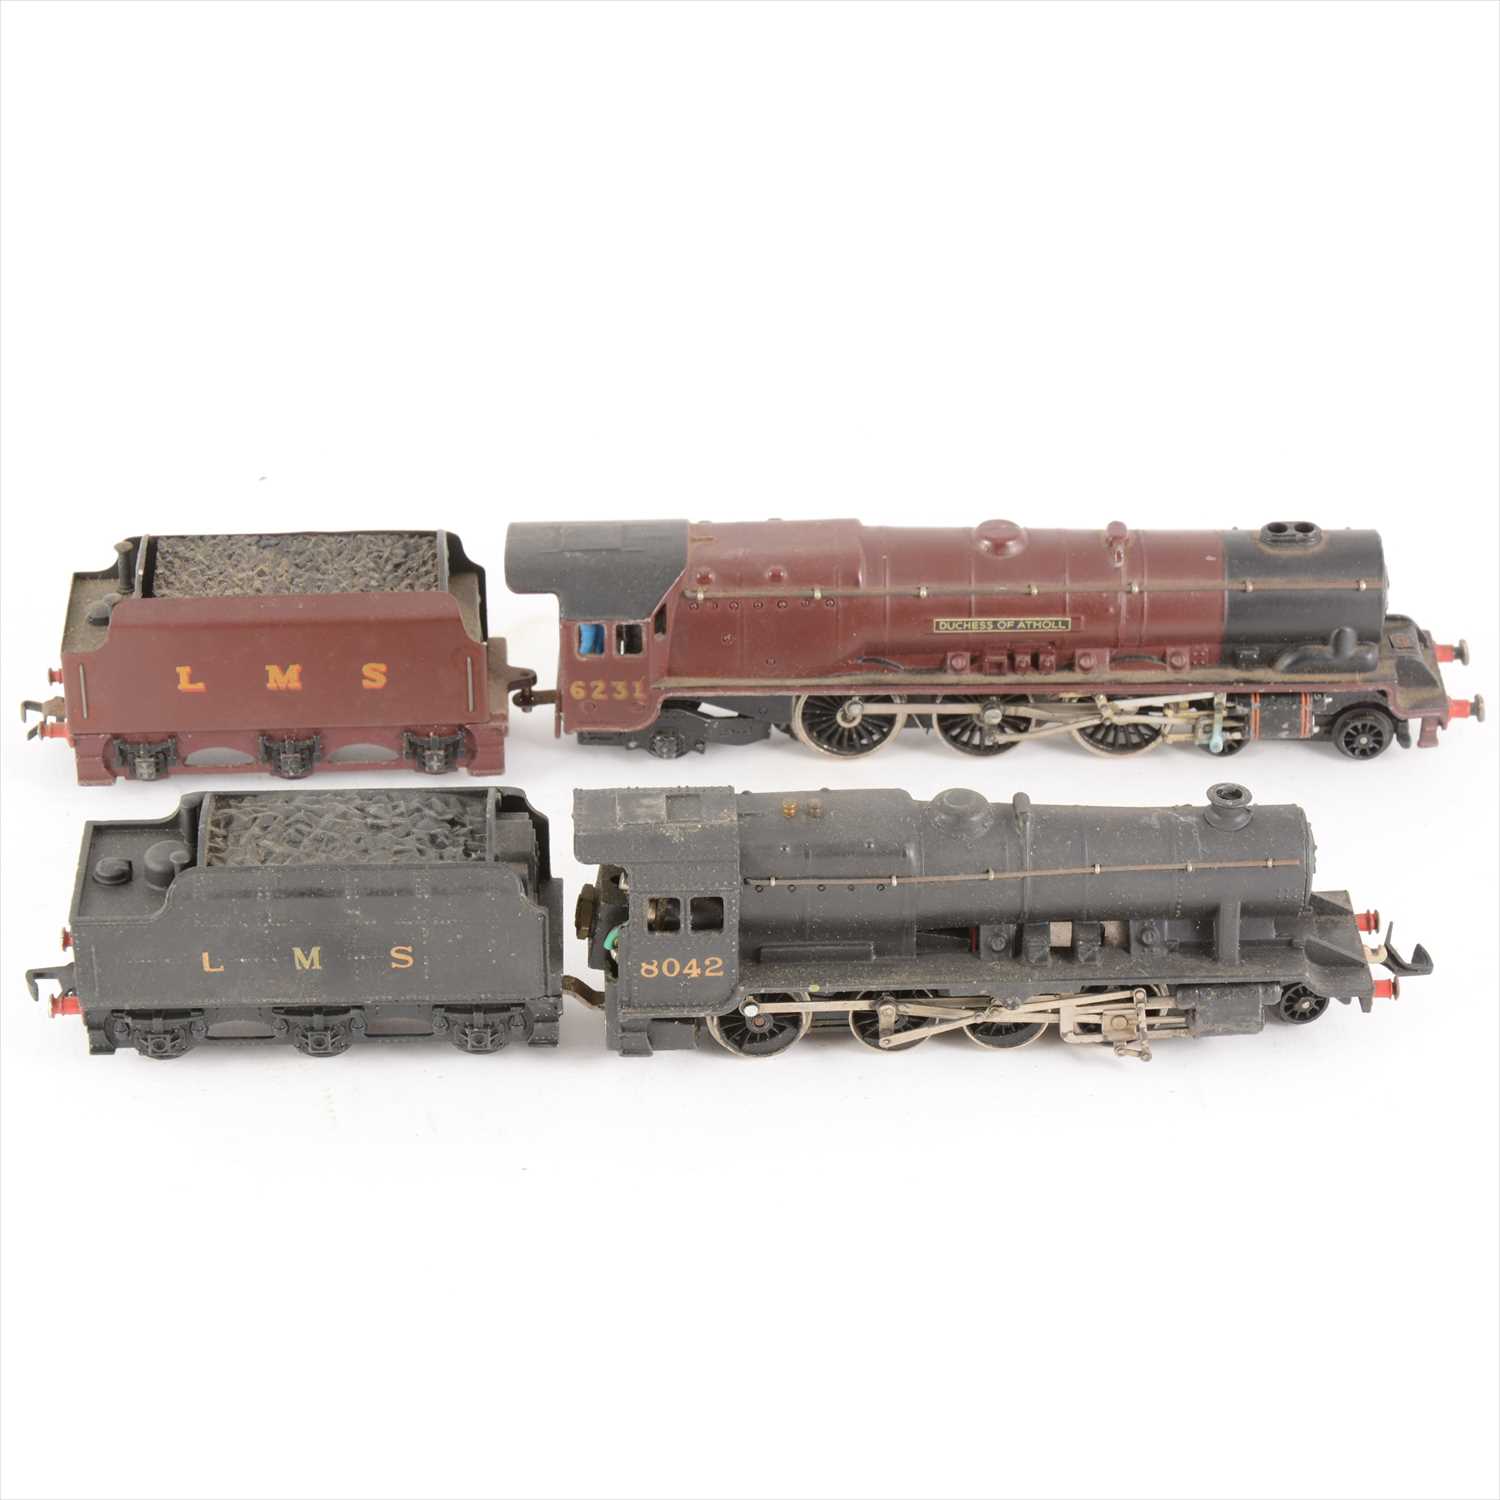 Lot 68 - OO gauge locomotives Hornby Dublo 'Duchess of Atholl' and Wrenn LMS 2-8-0 8042, both unboxed.